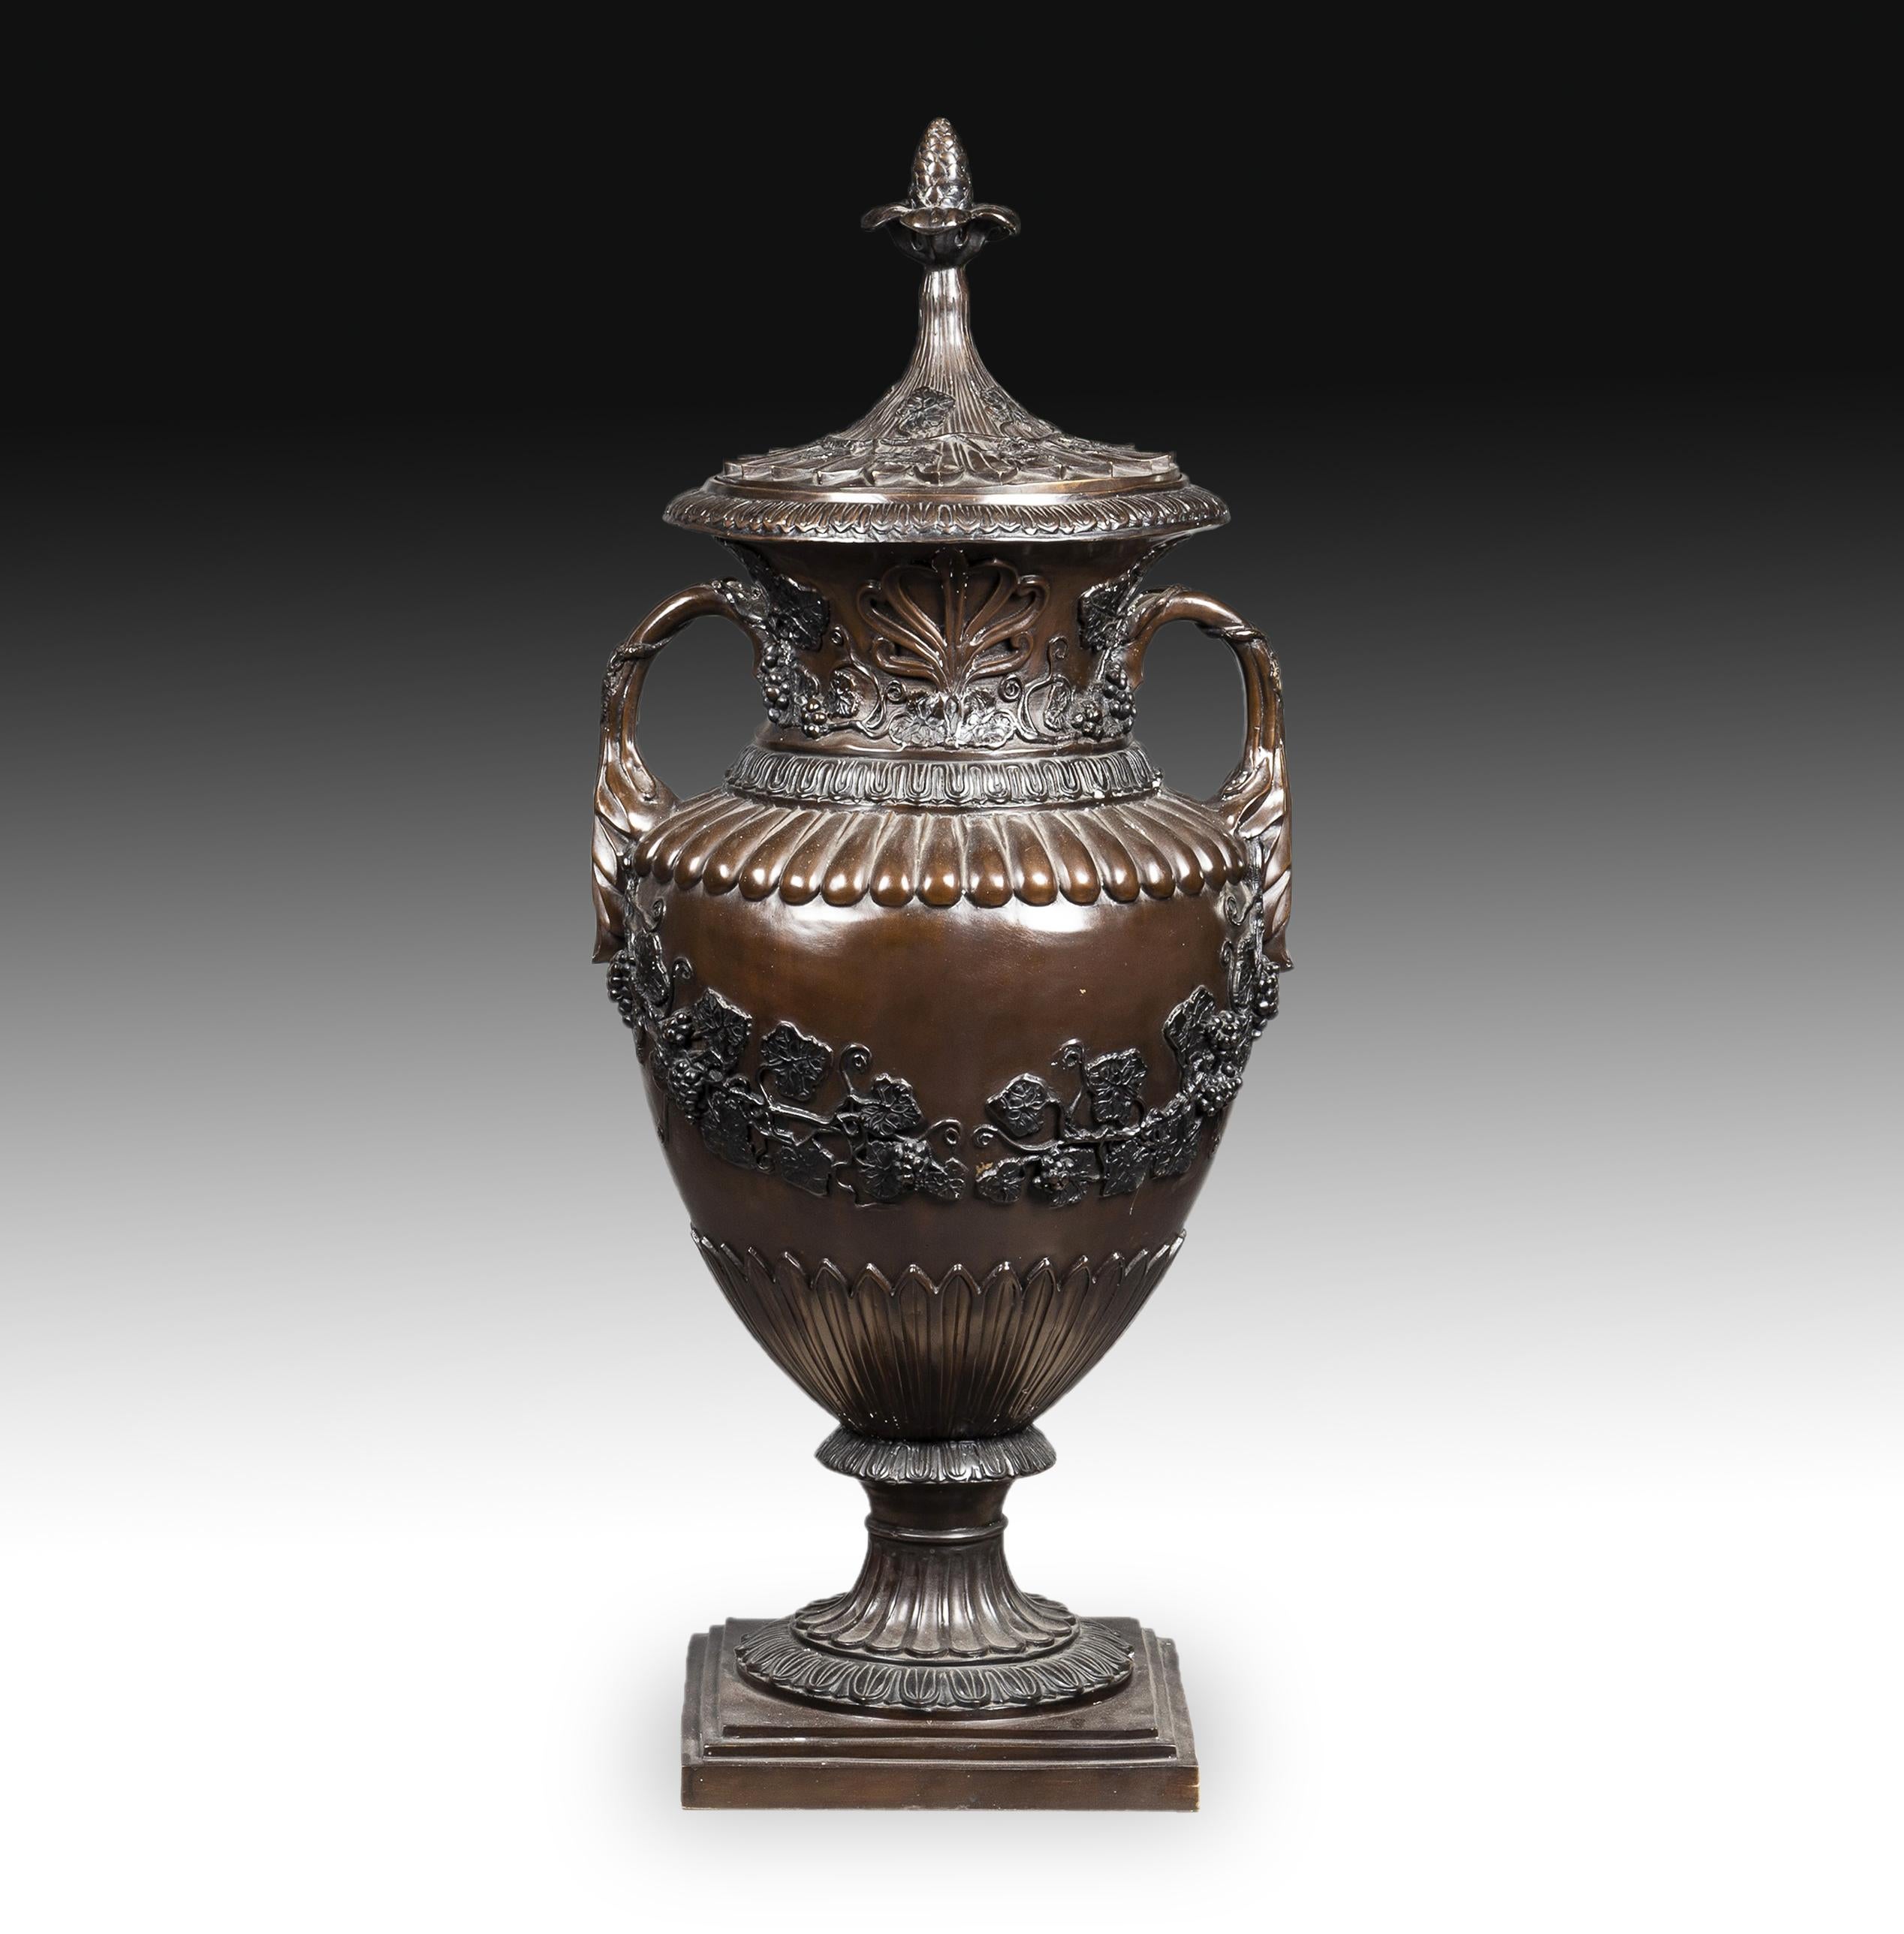 On a staggered square base, the amphora is raised. The foot presents gallons, which are repeated in the body of the container; in it there are branches and grapes as well as palmettes in the neck and two handles made with plant motifs. This same